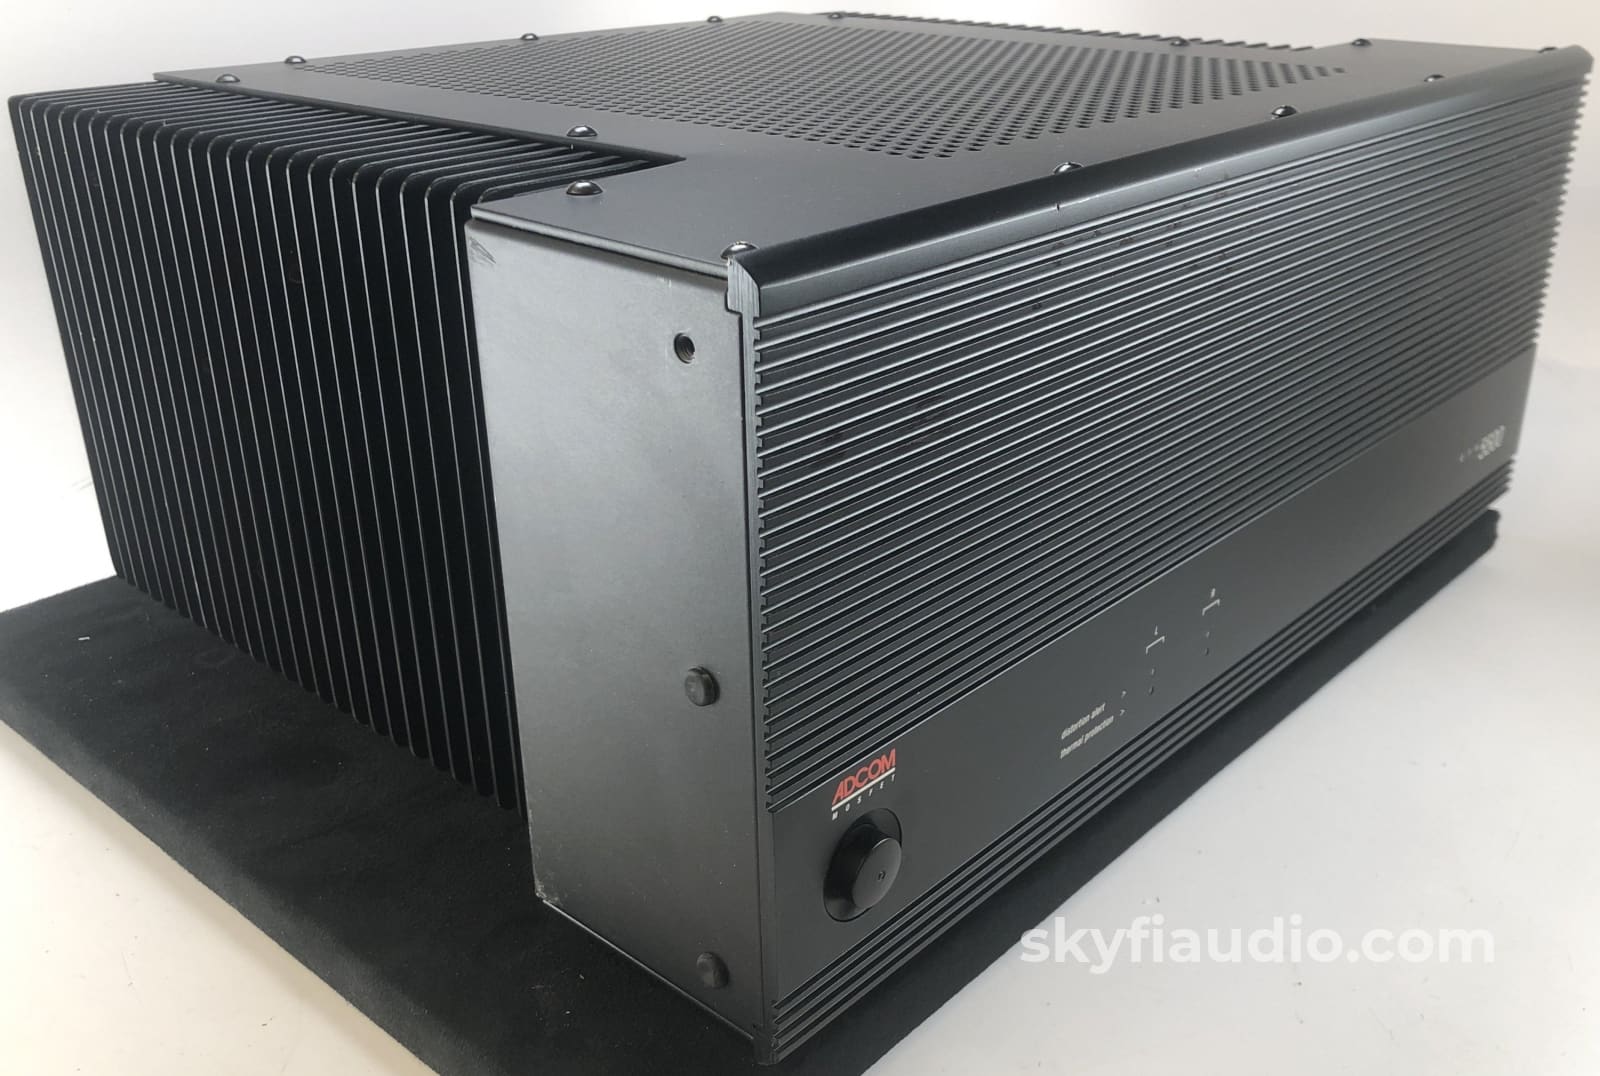 Adcom Gfa-5500 Amplifier With 200 Watts Per Channel